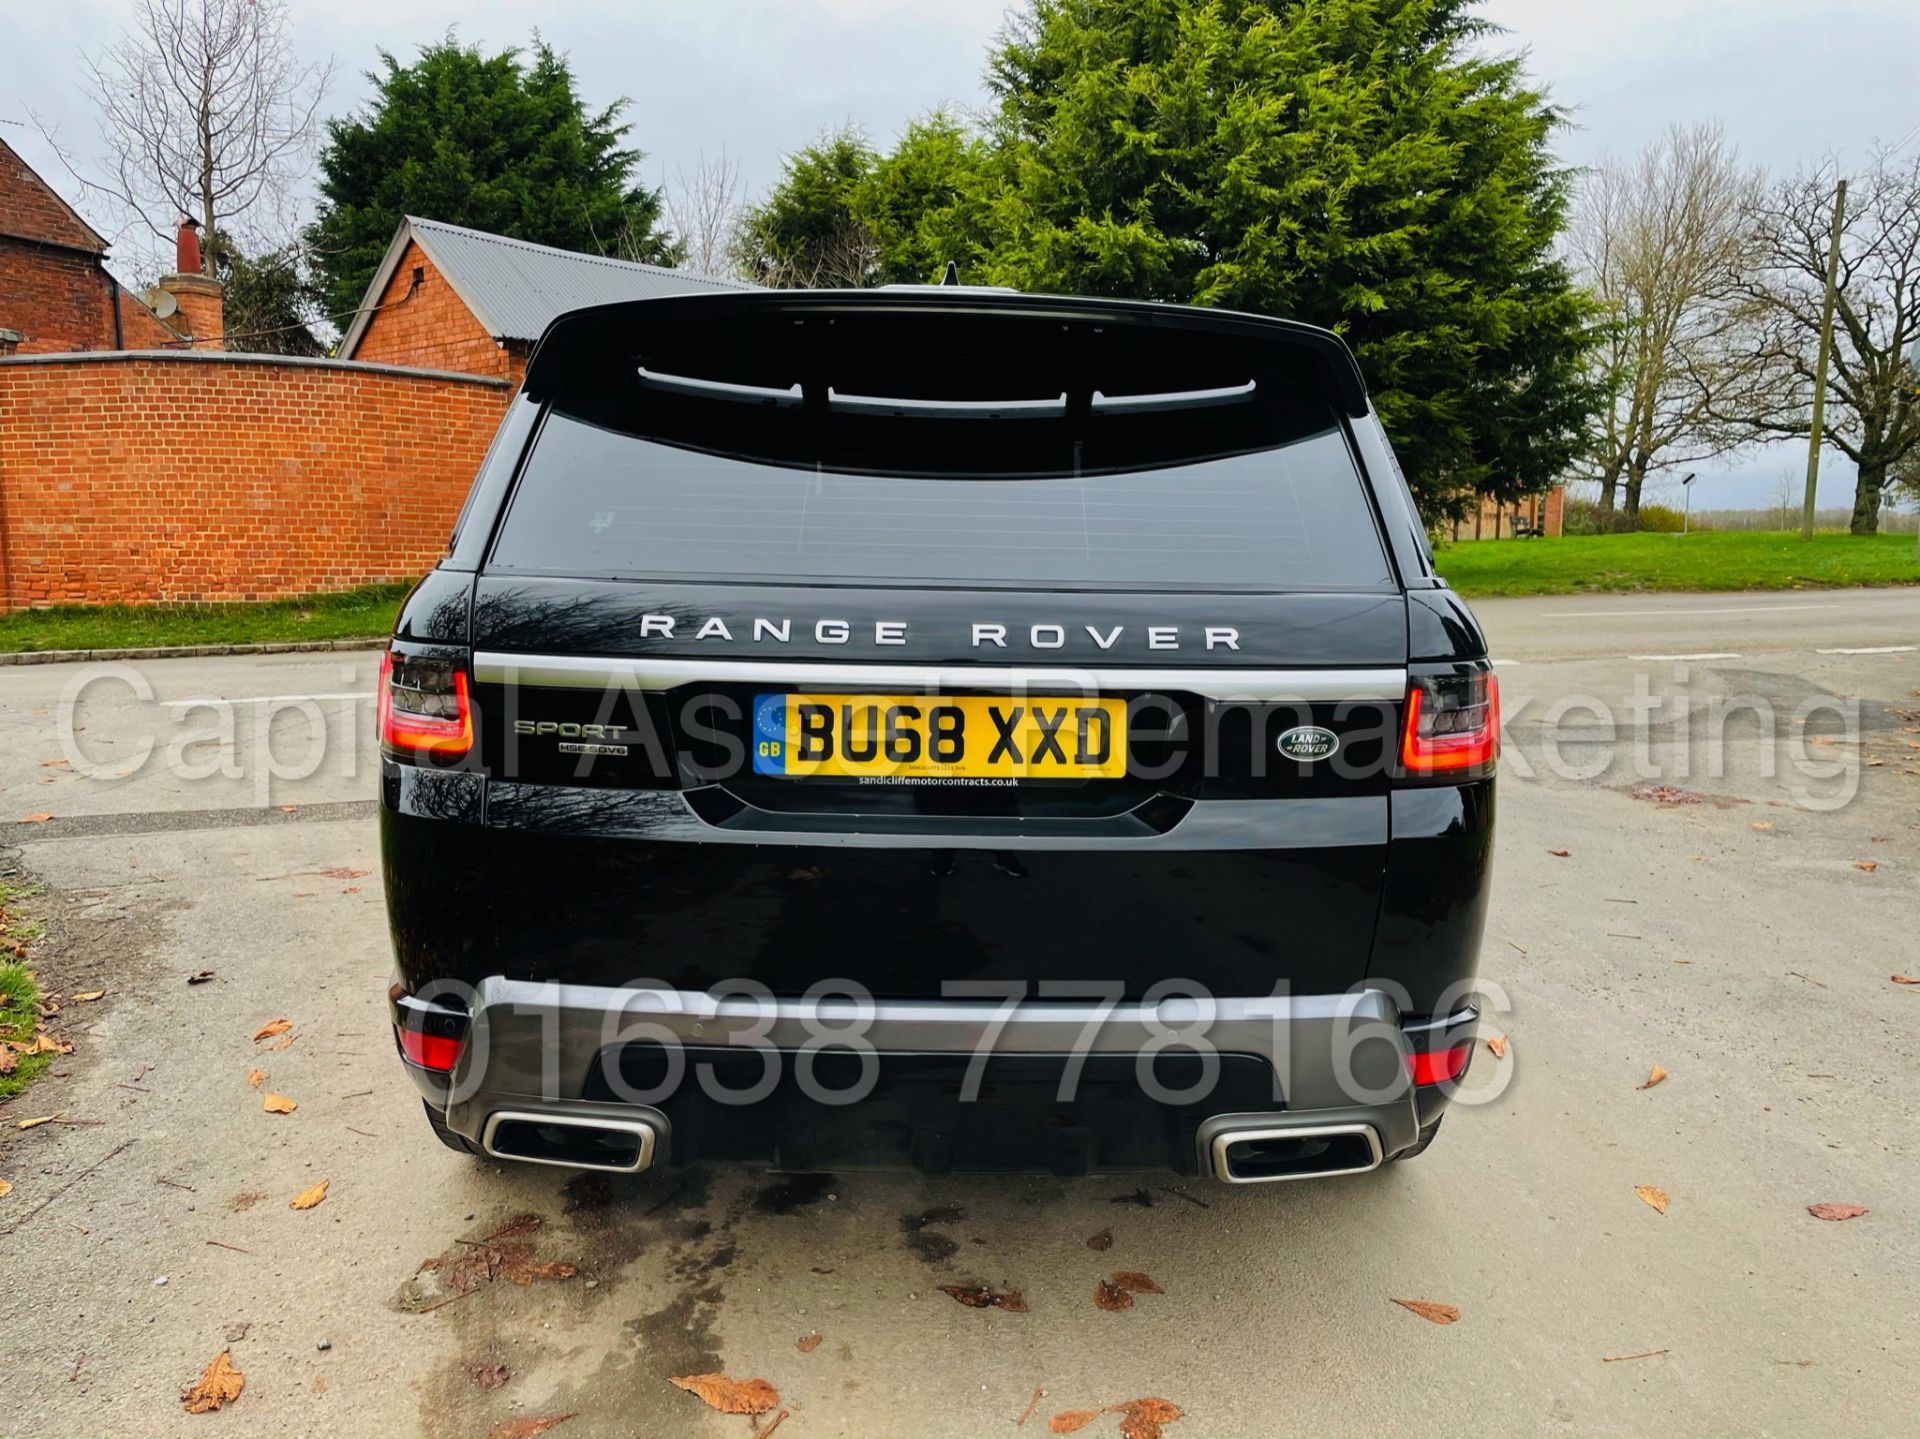 RANGE ROVER SPORT *HSE EDITION* SUV (2019 MODEL) '3.0 SDV6 - 306 BHP - 8 SPEED AUTO' *FULLY LOADED* - Image 11 of 56